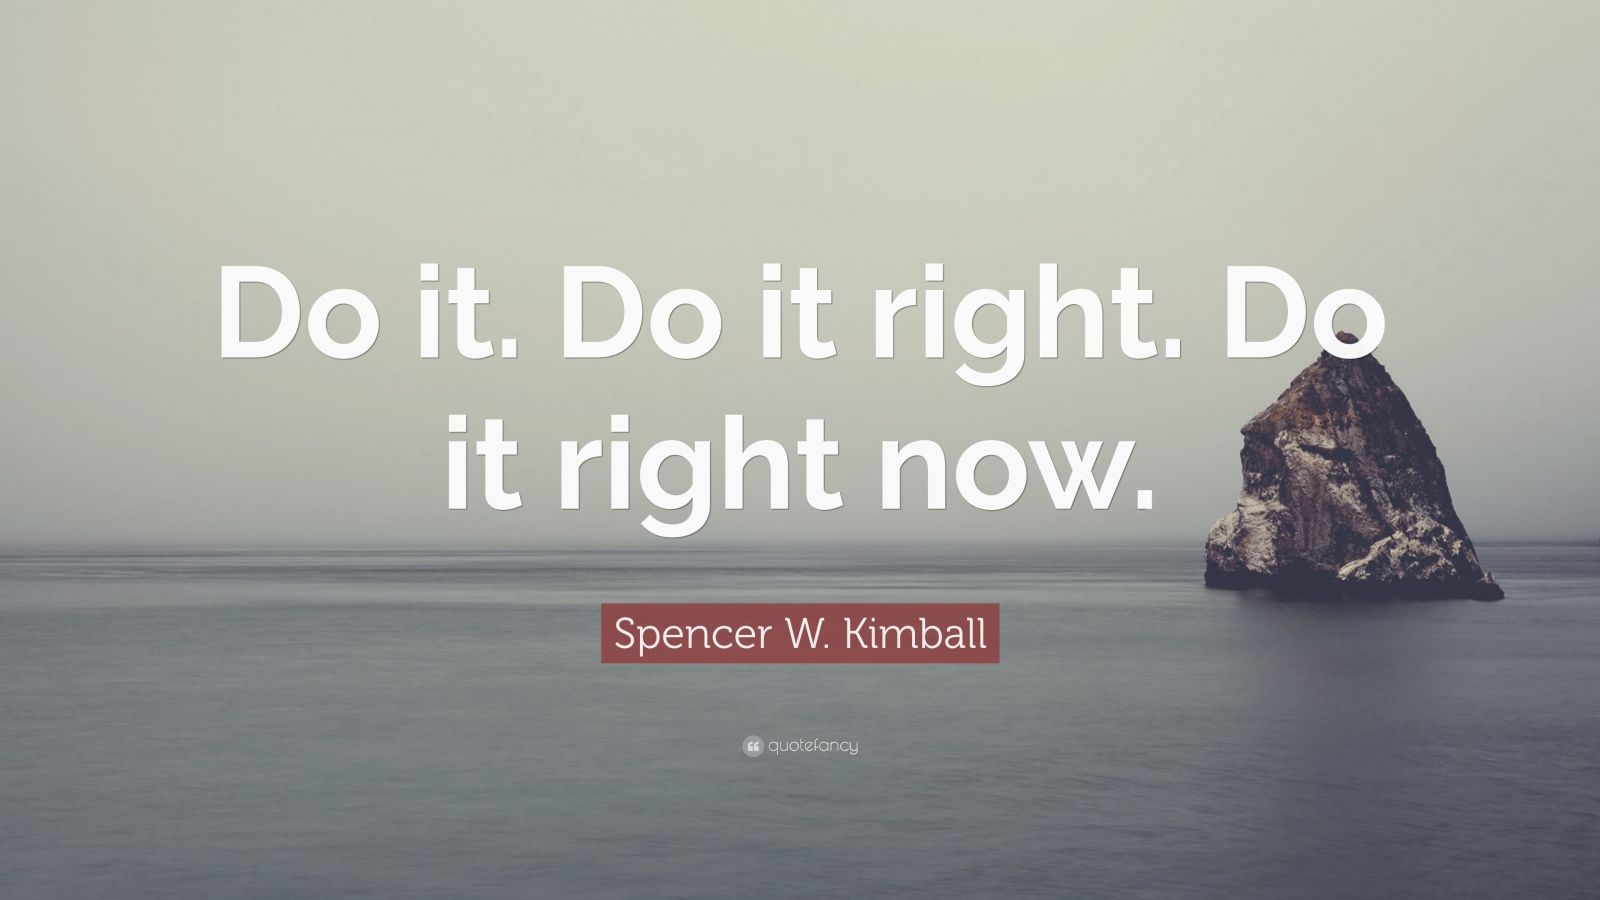 Spencer W. Kimball Quote: “Do it. Do it right. Do it right now.” (12 ...